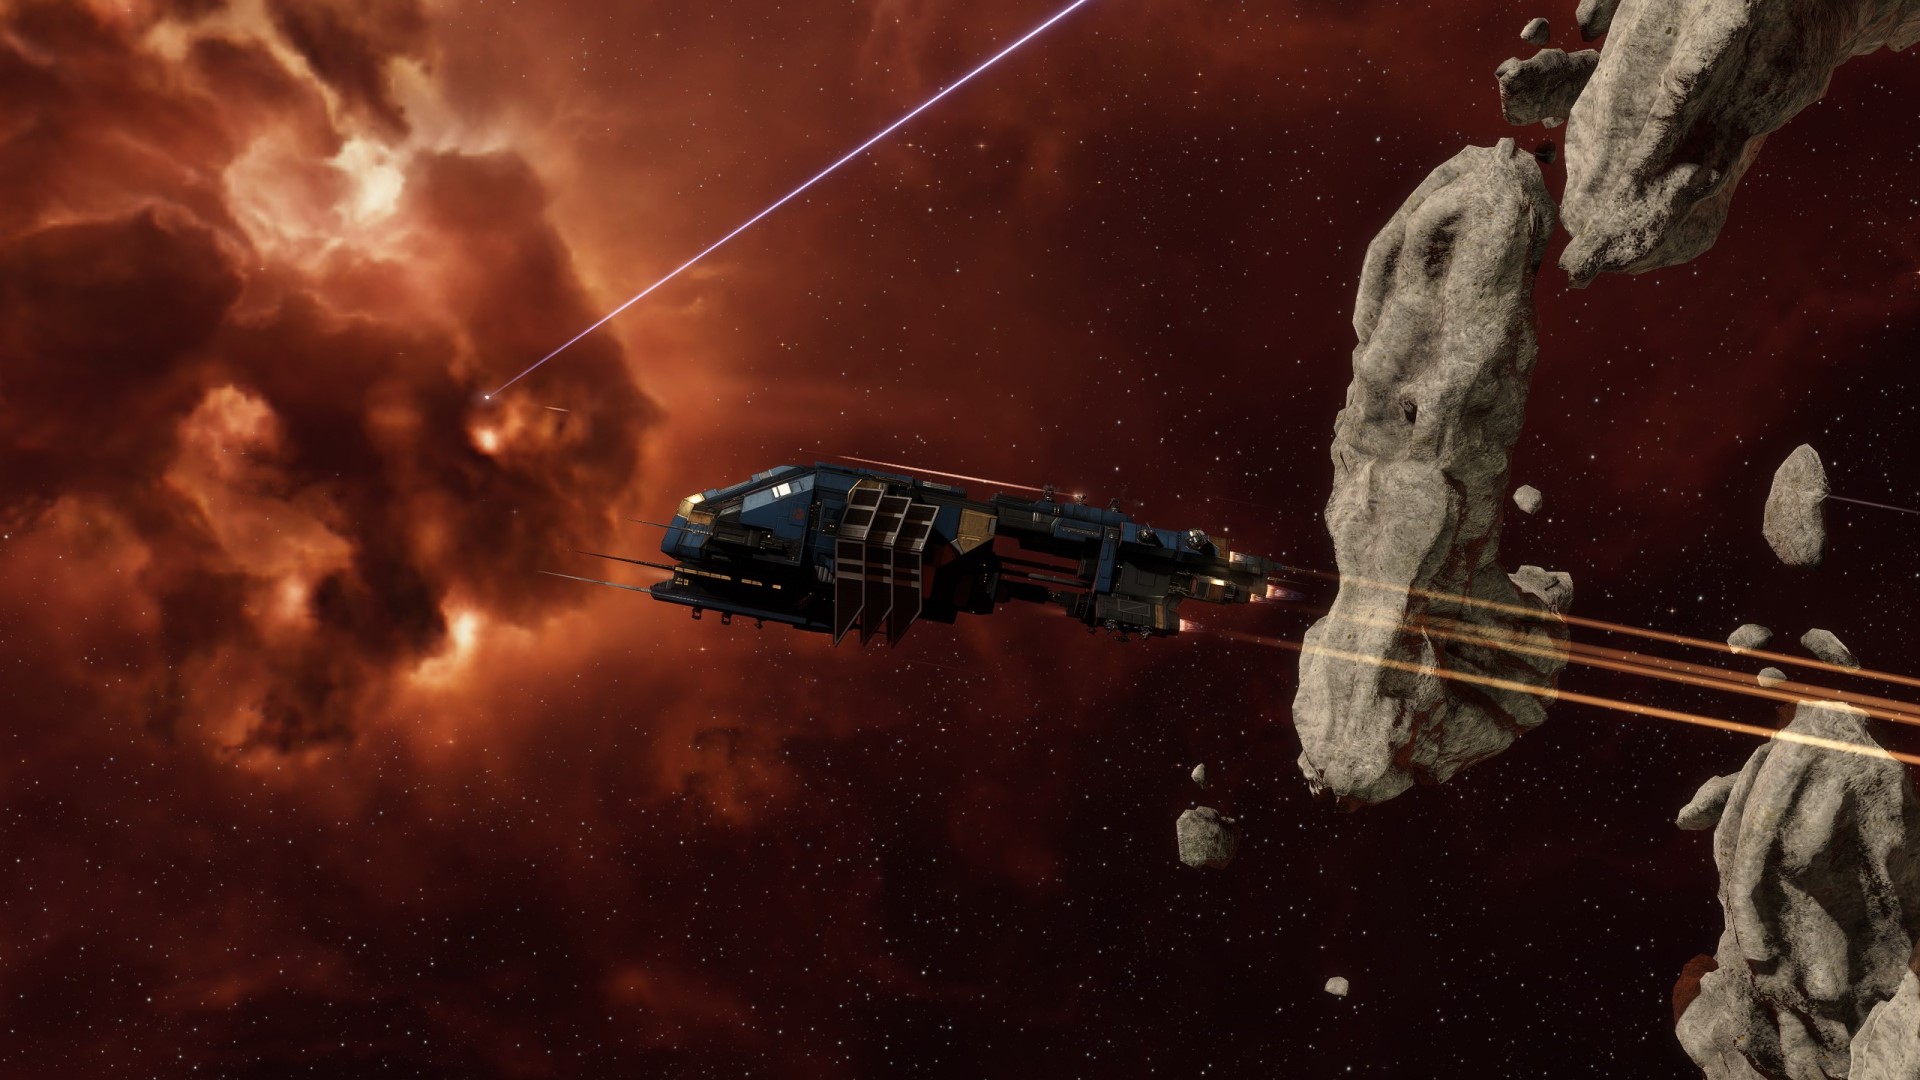 Eve Online's browser version is now available to everyone